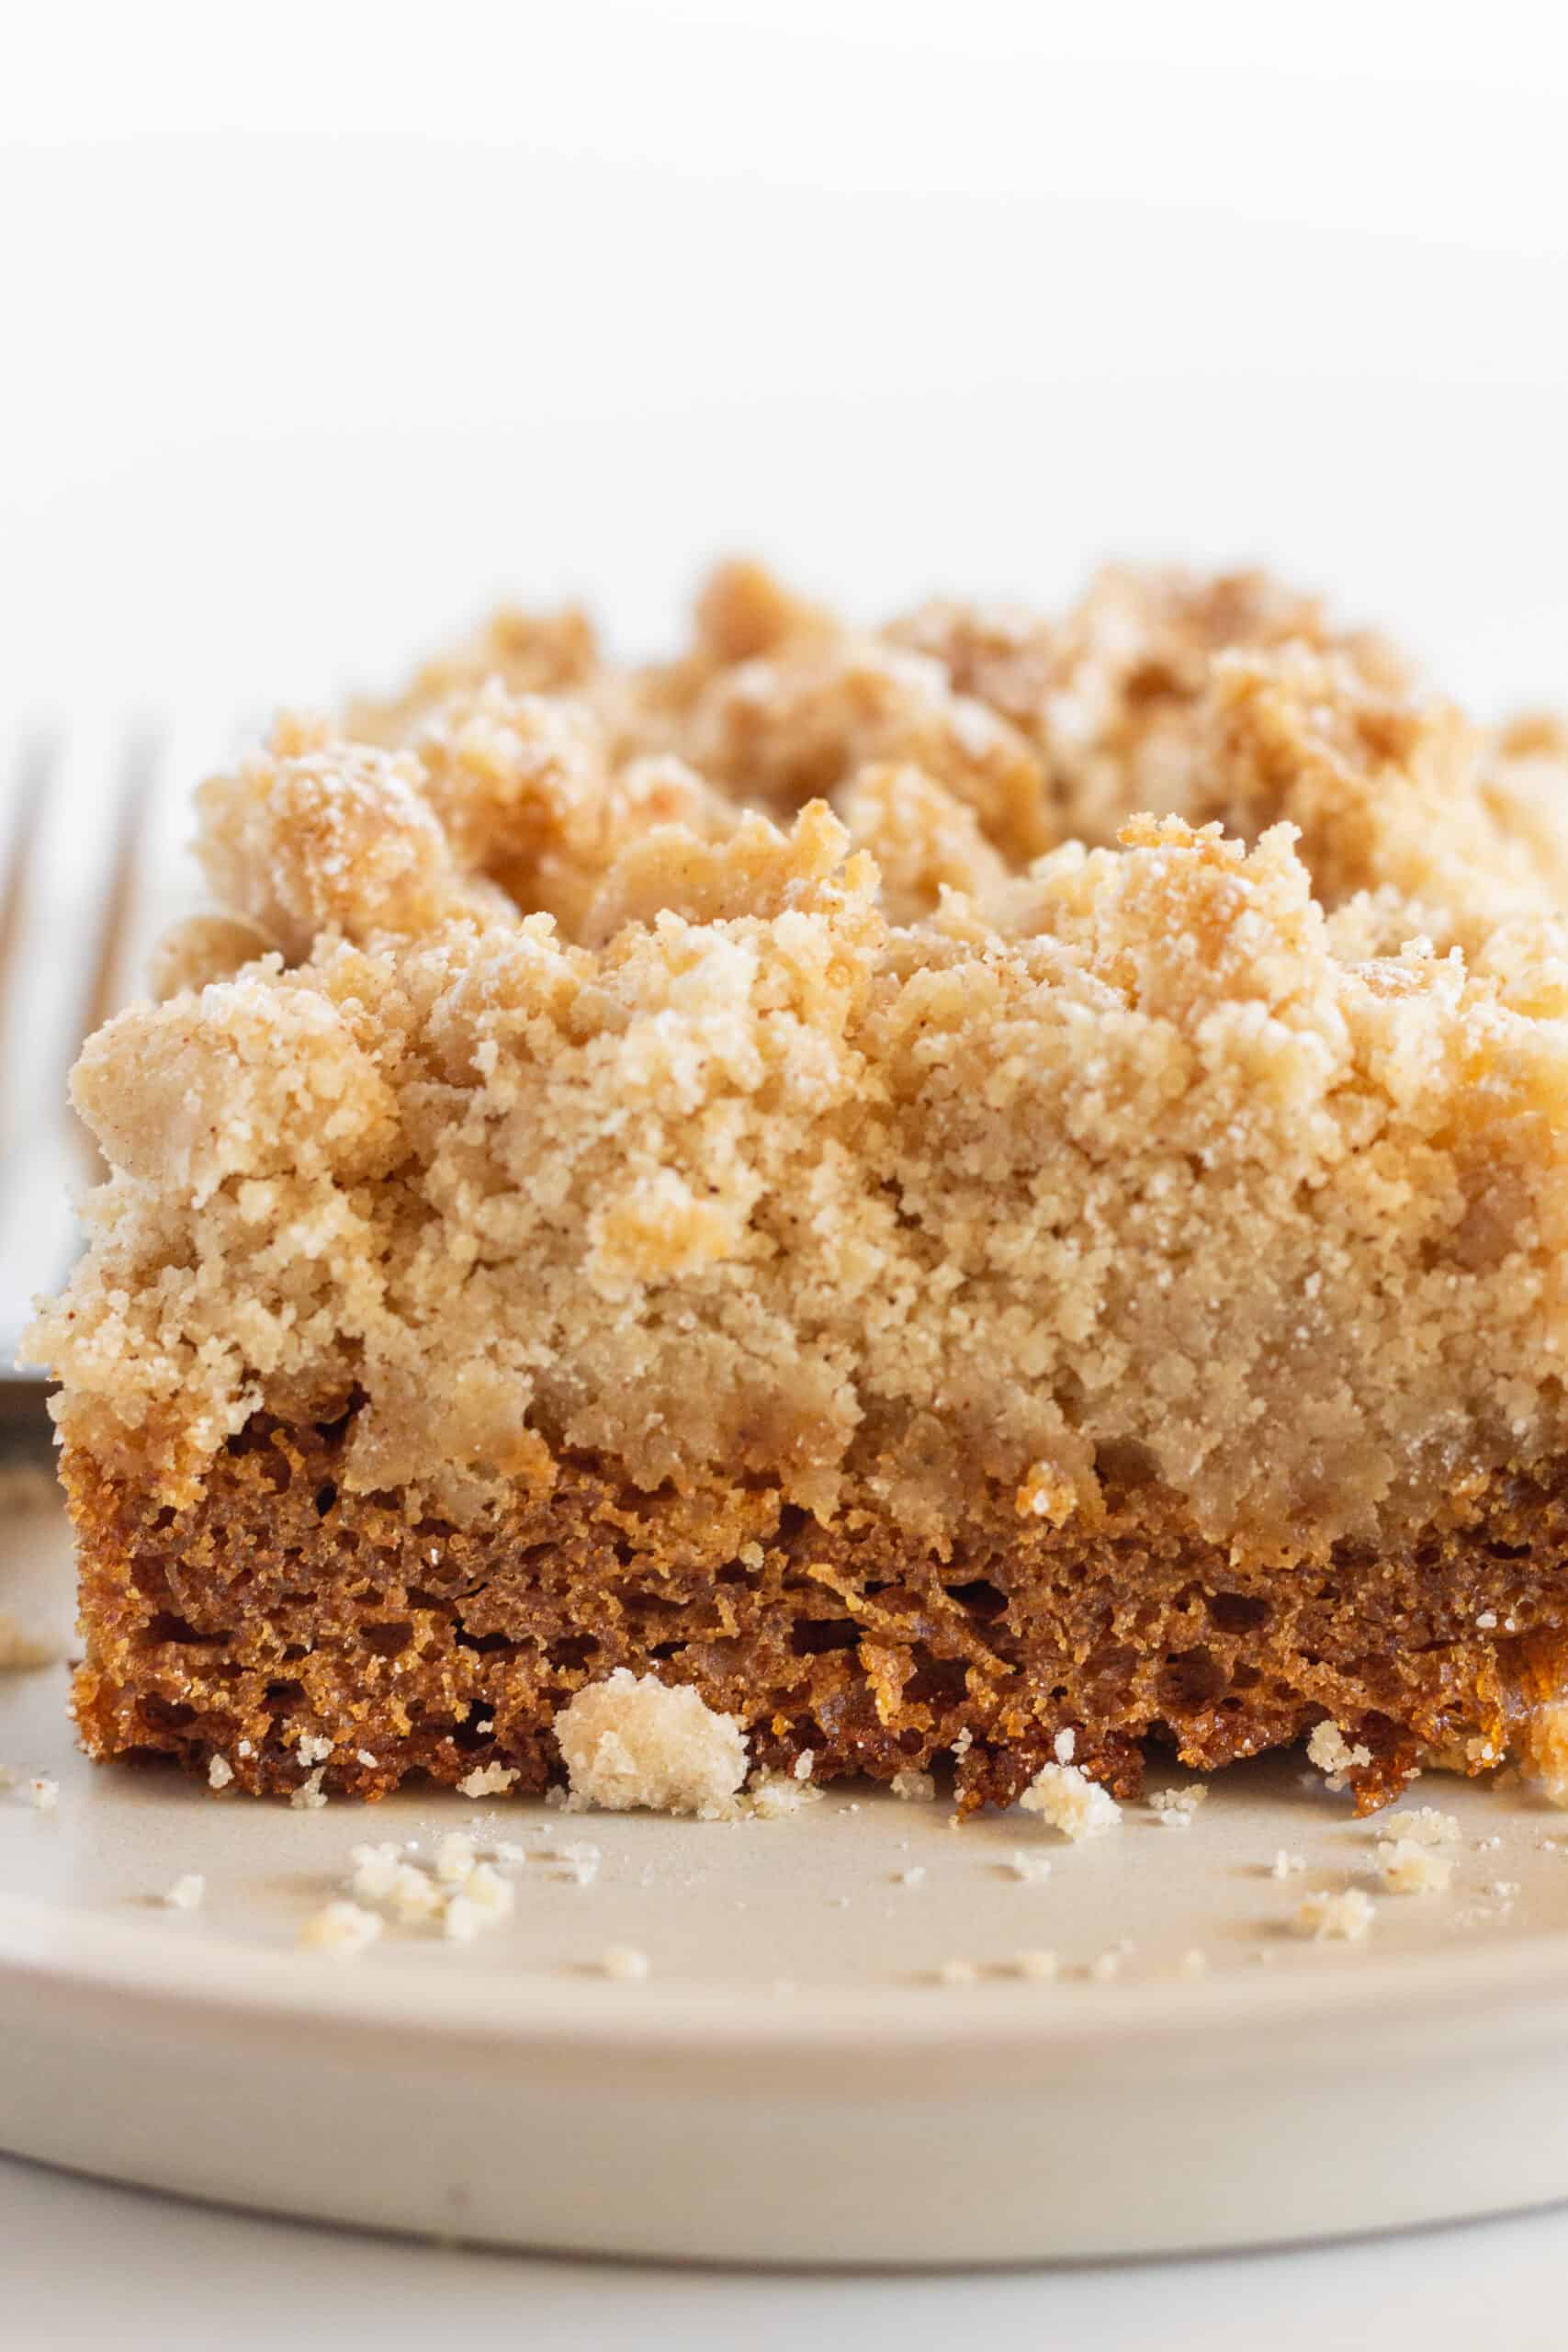 A square of gingerbread coffee cake on a white plate with a fork.